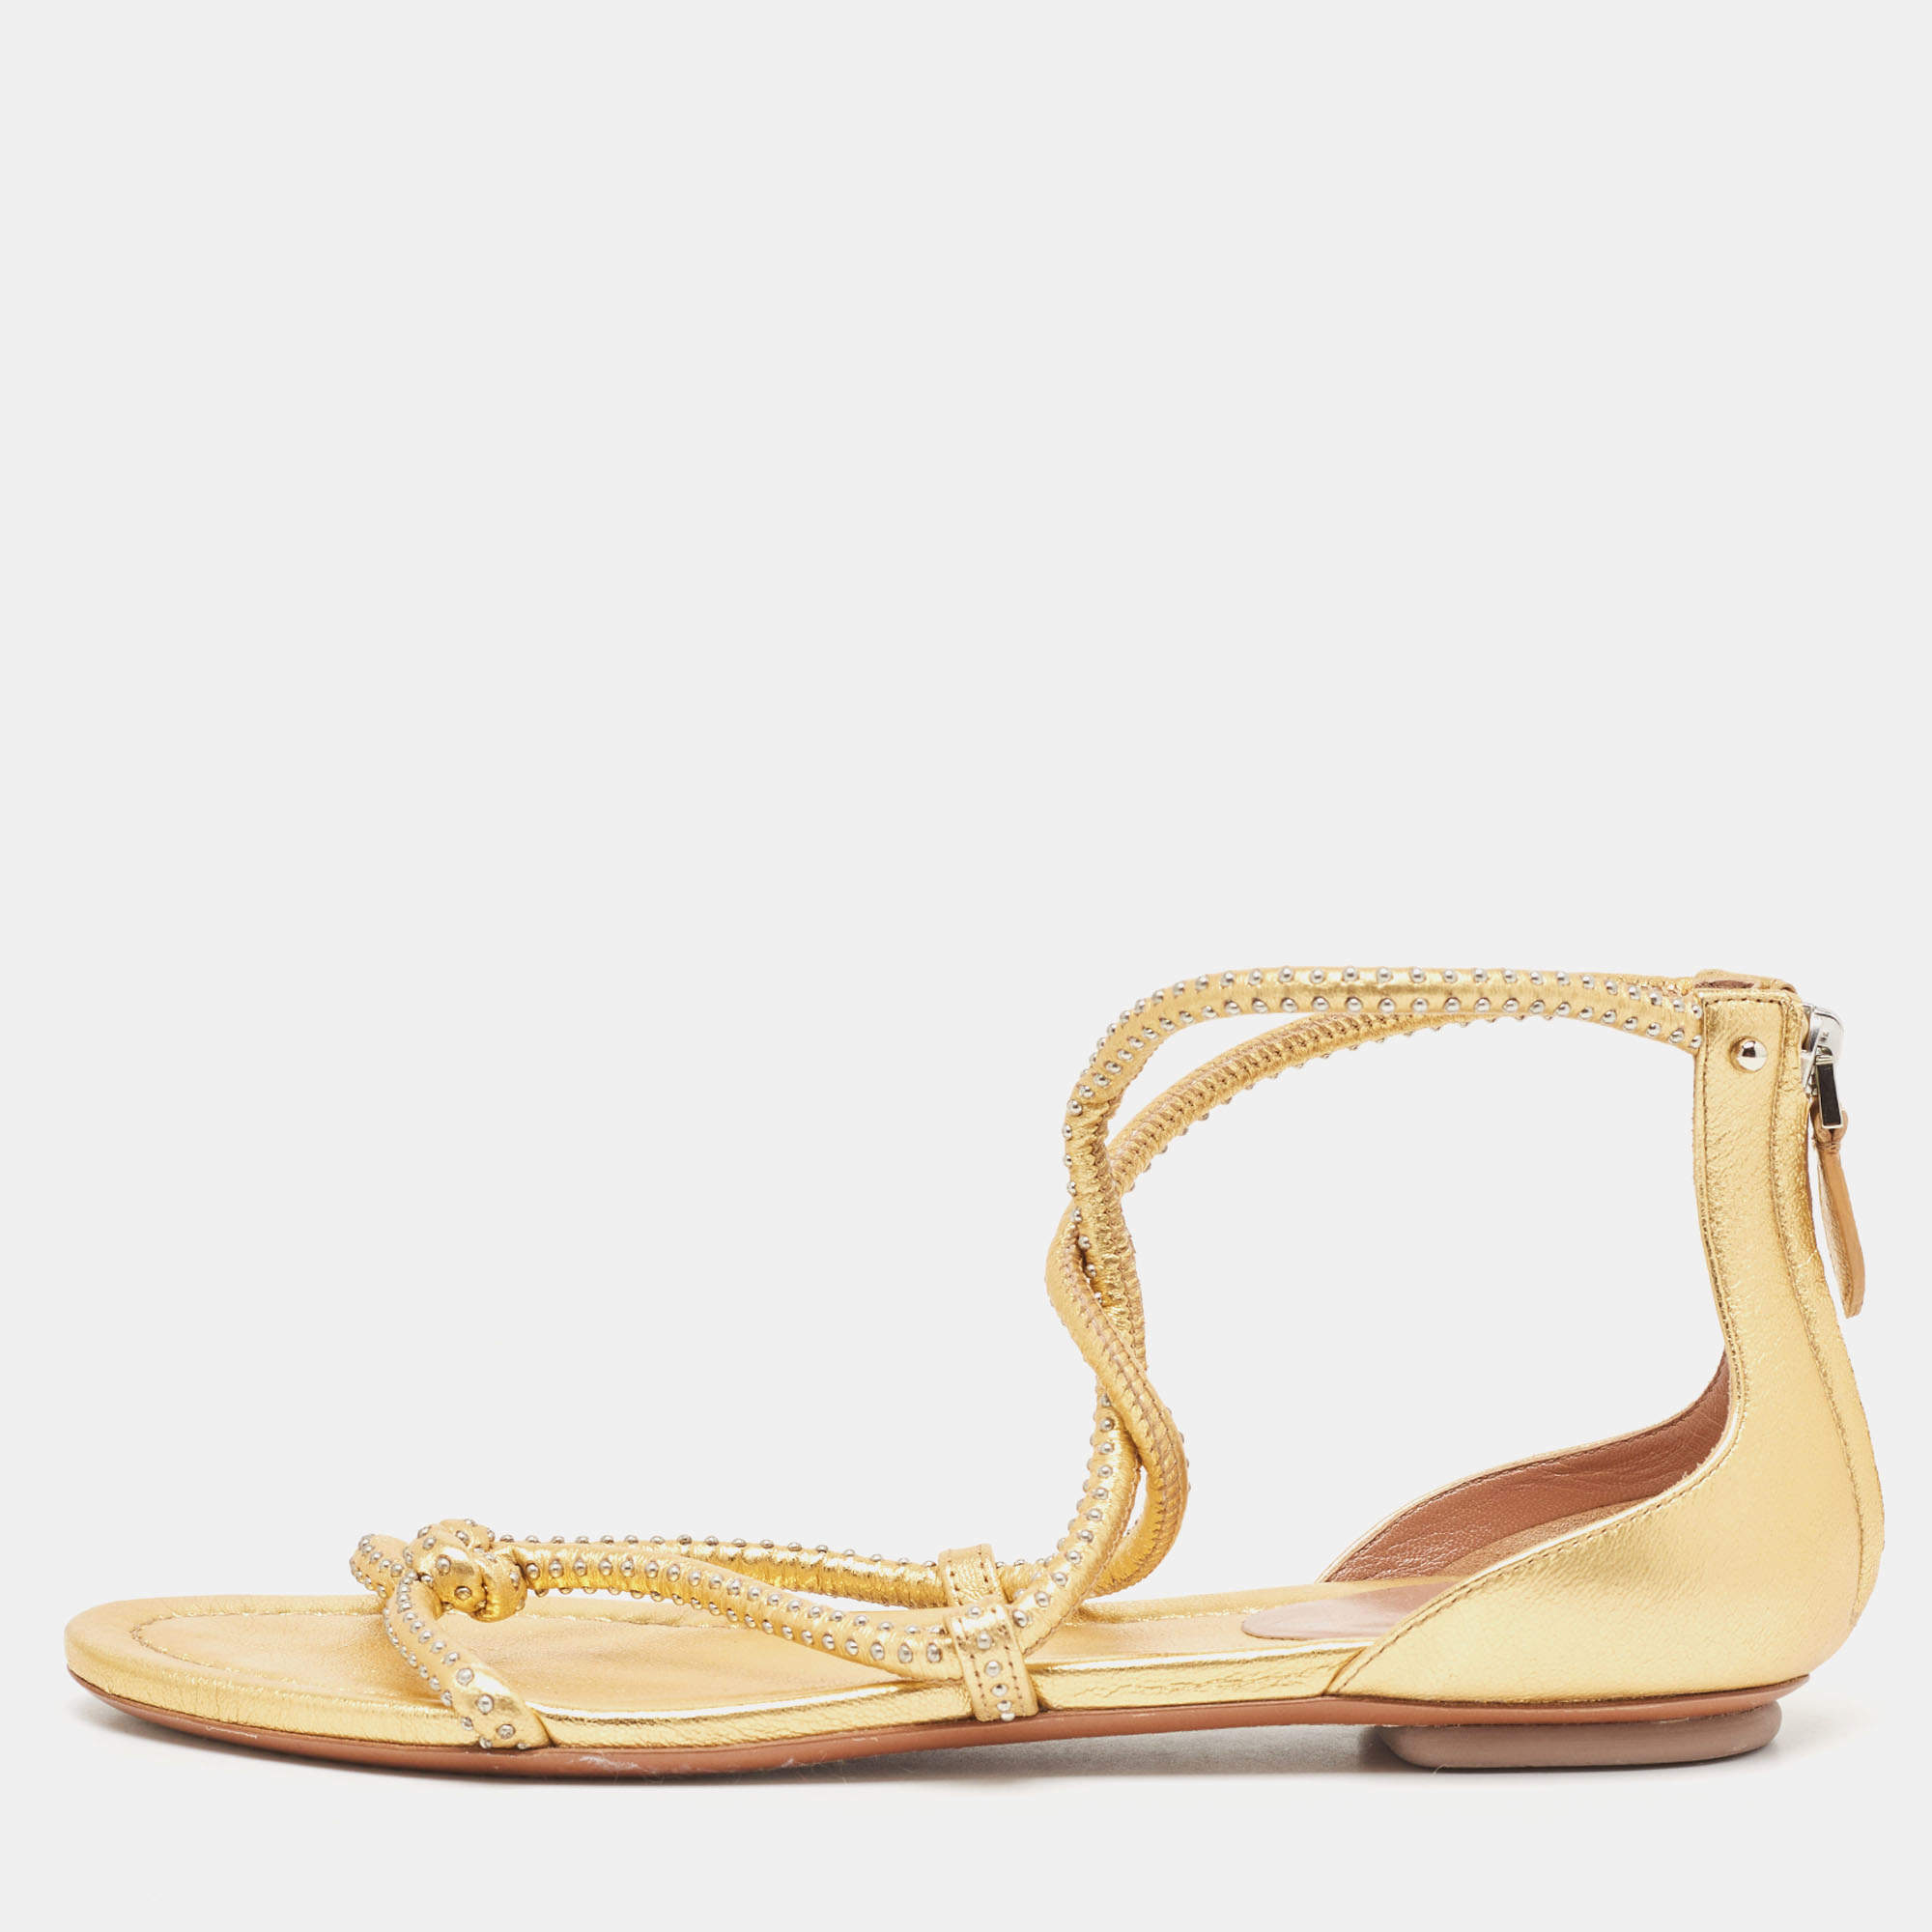 Alaia Gold Studded Leather Strappy Flat Sandals Size 38.5